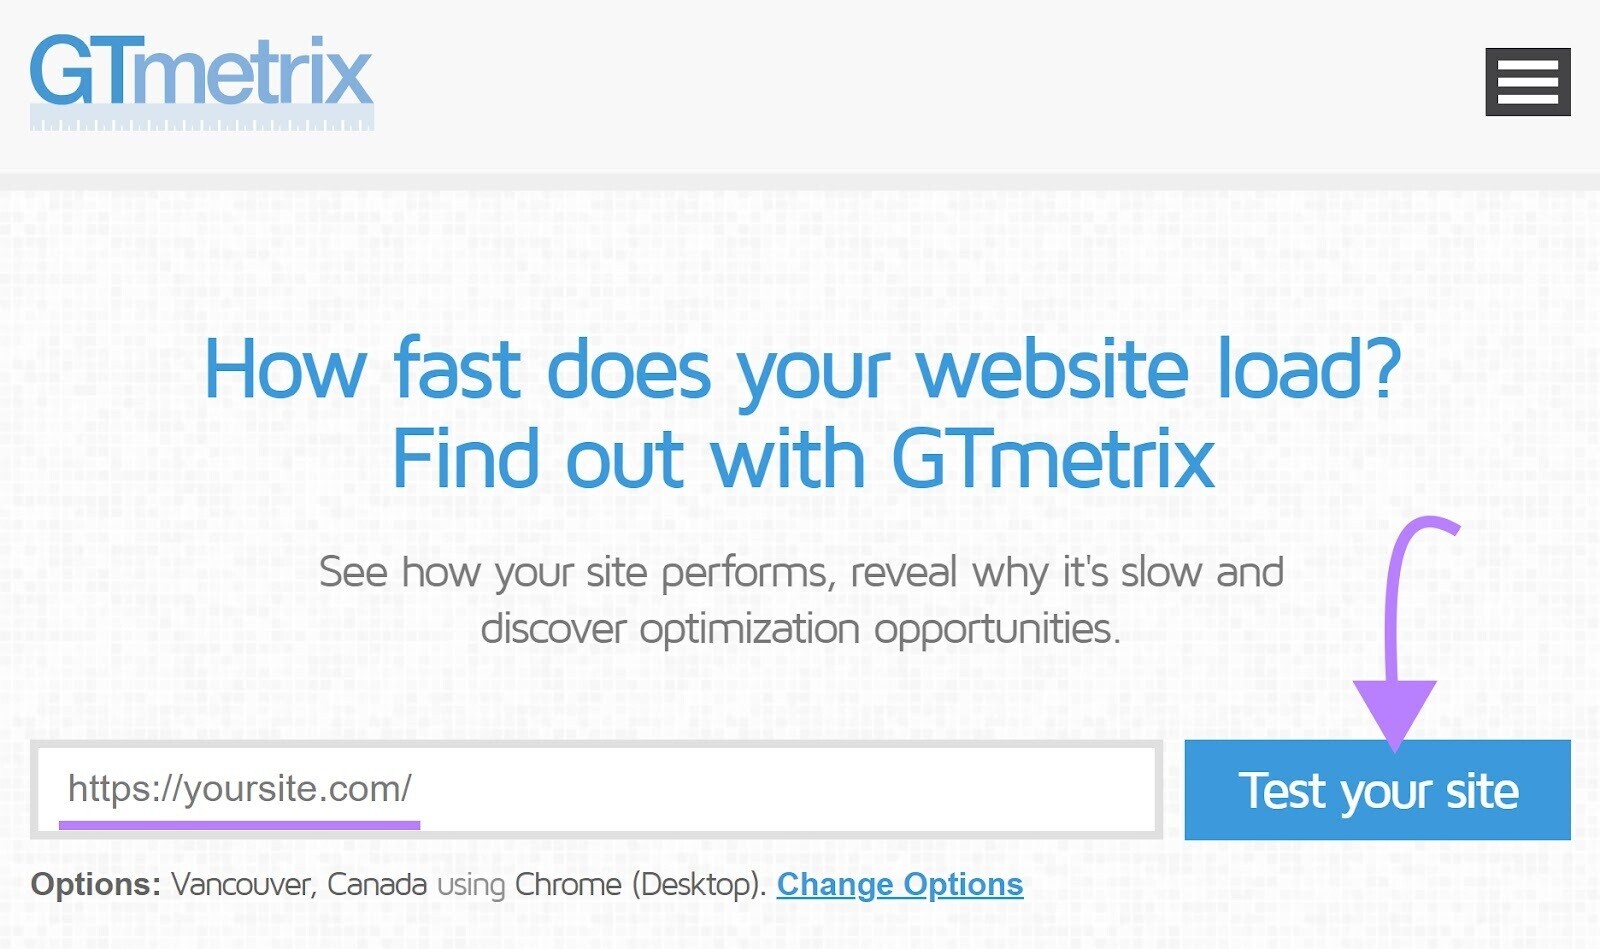 GTmetrix ،mepage with ،le "How fast does your website load" Find out with GTmetrix"